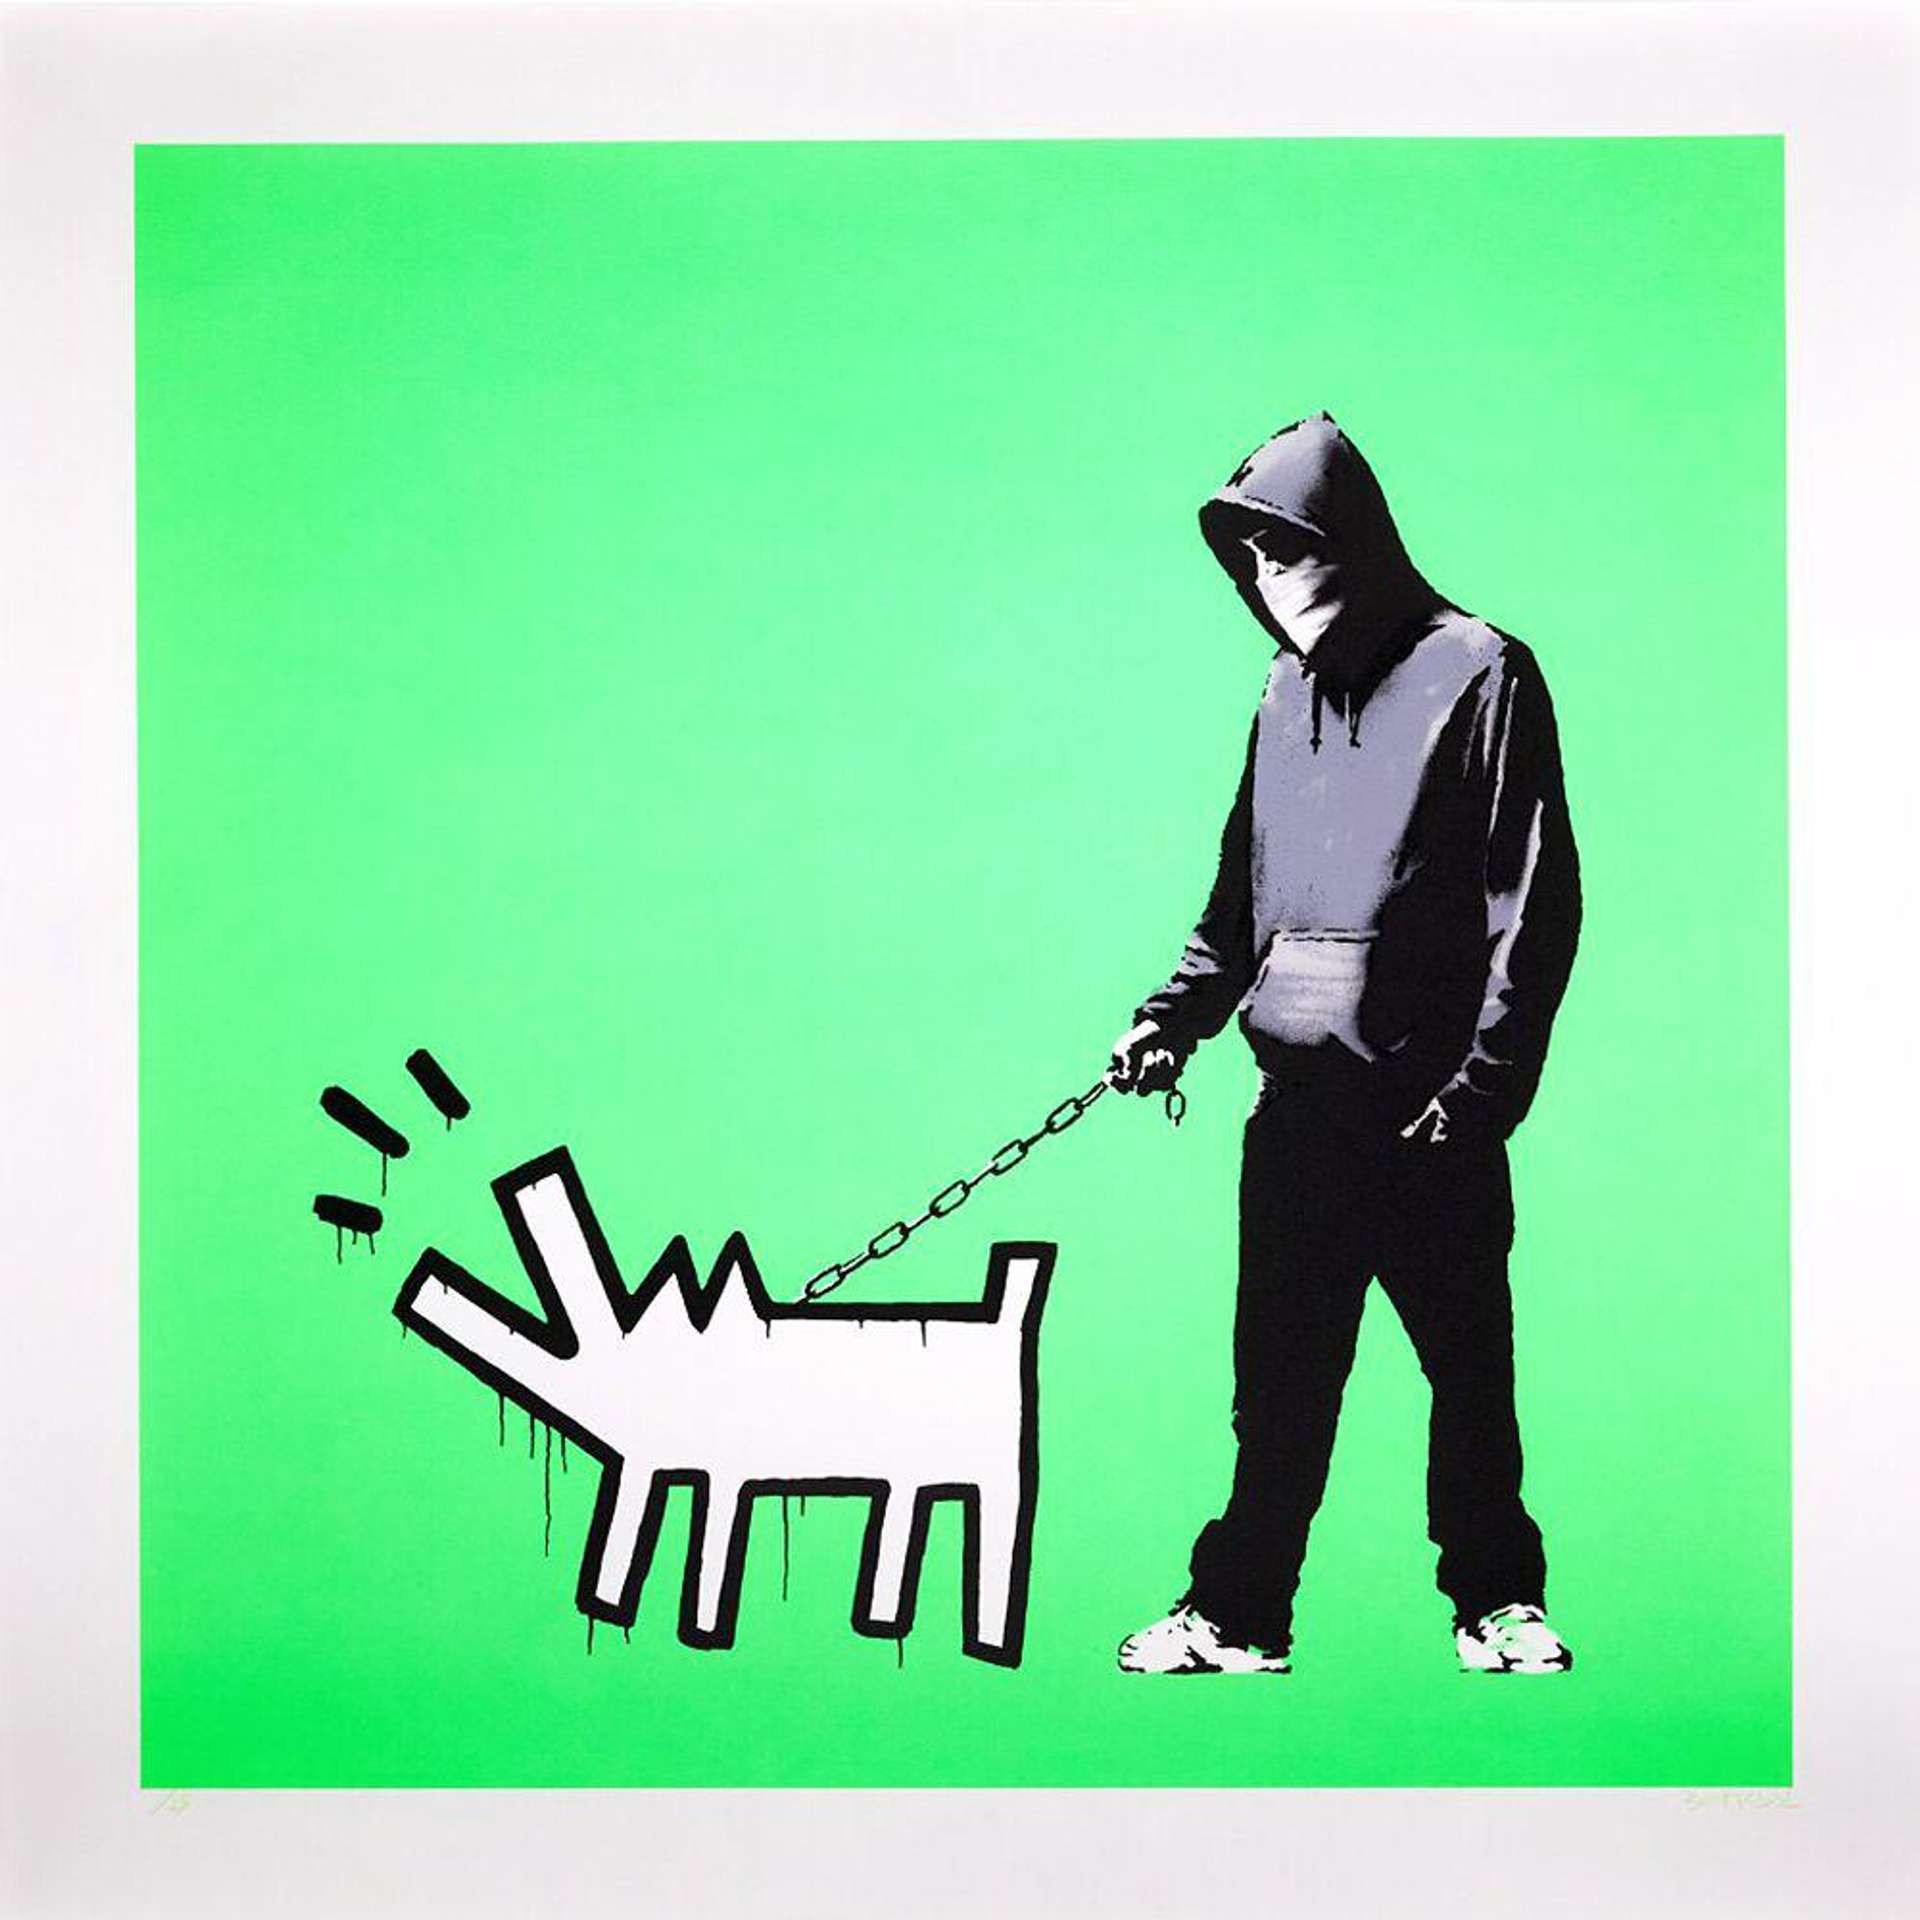 A screenprint by Banksy appropriating Keith Haring's iconic barking dog, depicted here held by a hooded man against a neon green background.